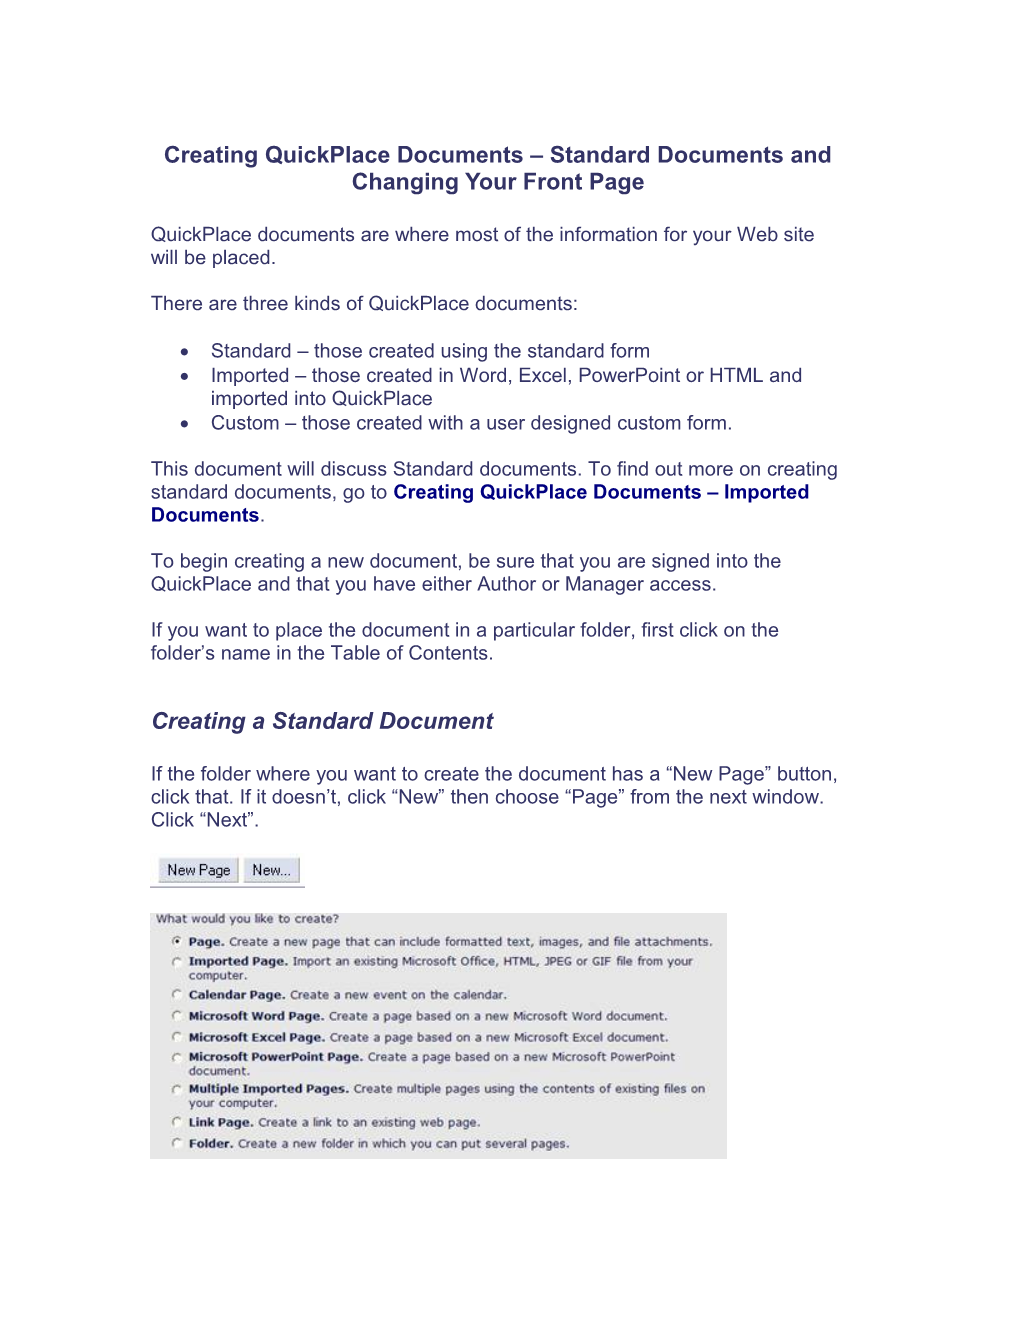 Creating Quickplace Documents Standard Documents and Changing Your Front Page